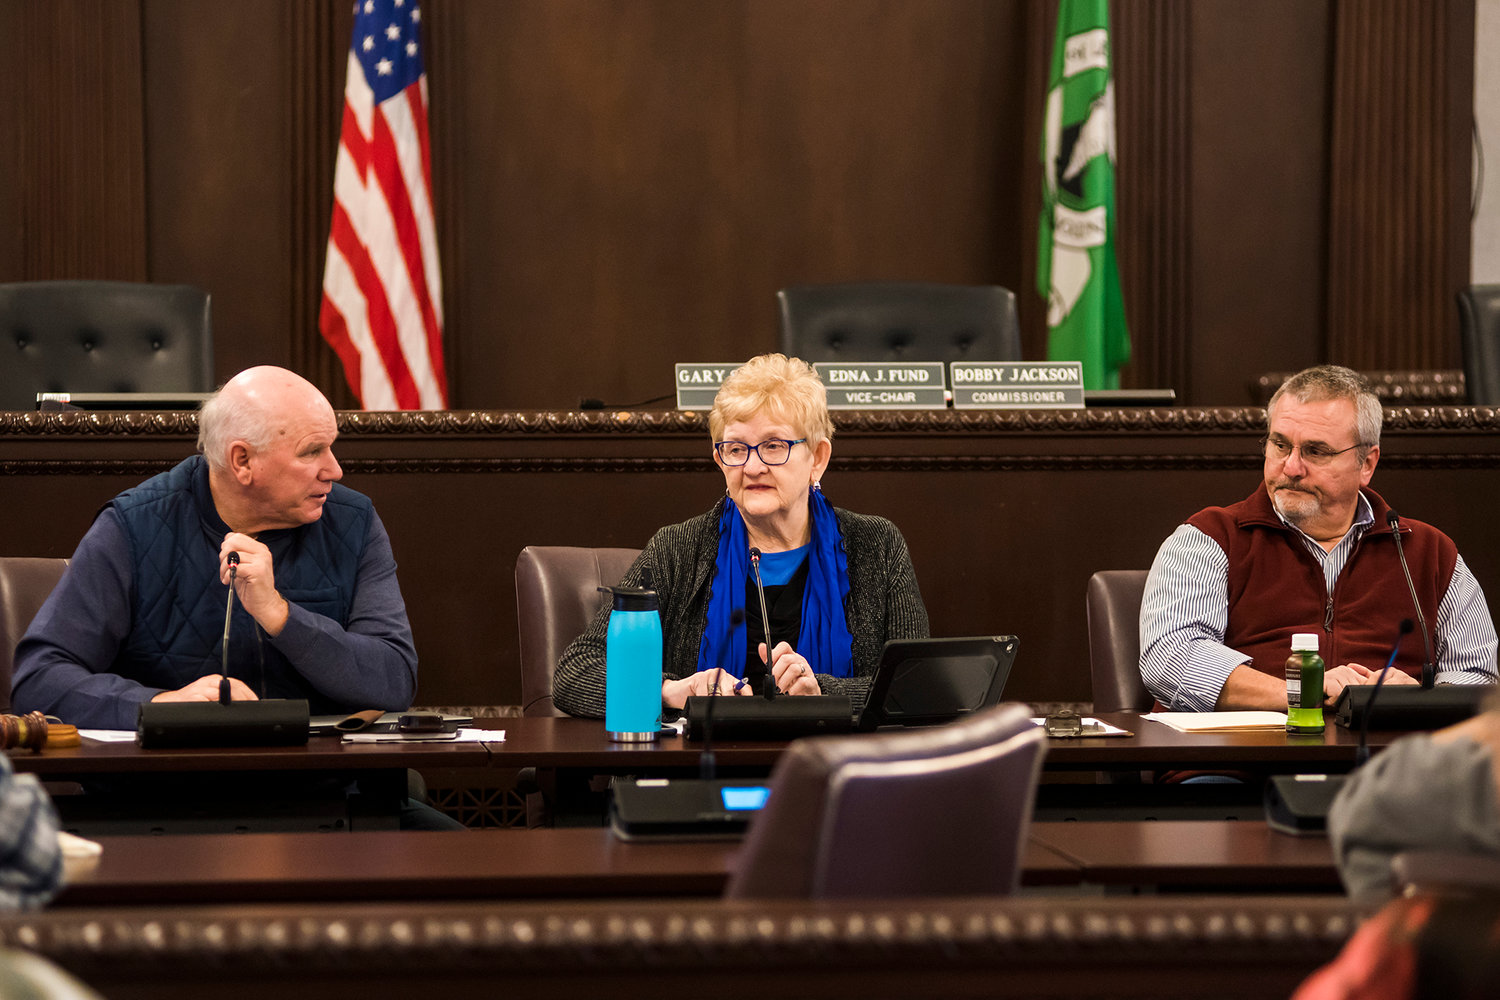 FILE PHOTO — From left to right, county commissioners Gary Stamper, Edna Fund, and Bobby Jackson attend a mayors meeting Jan. 3, 2020, at the Lewis County Courthouse in Chehalis.